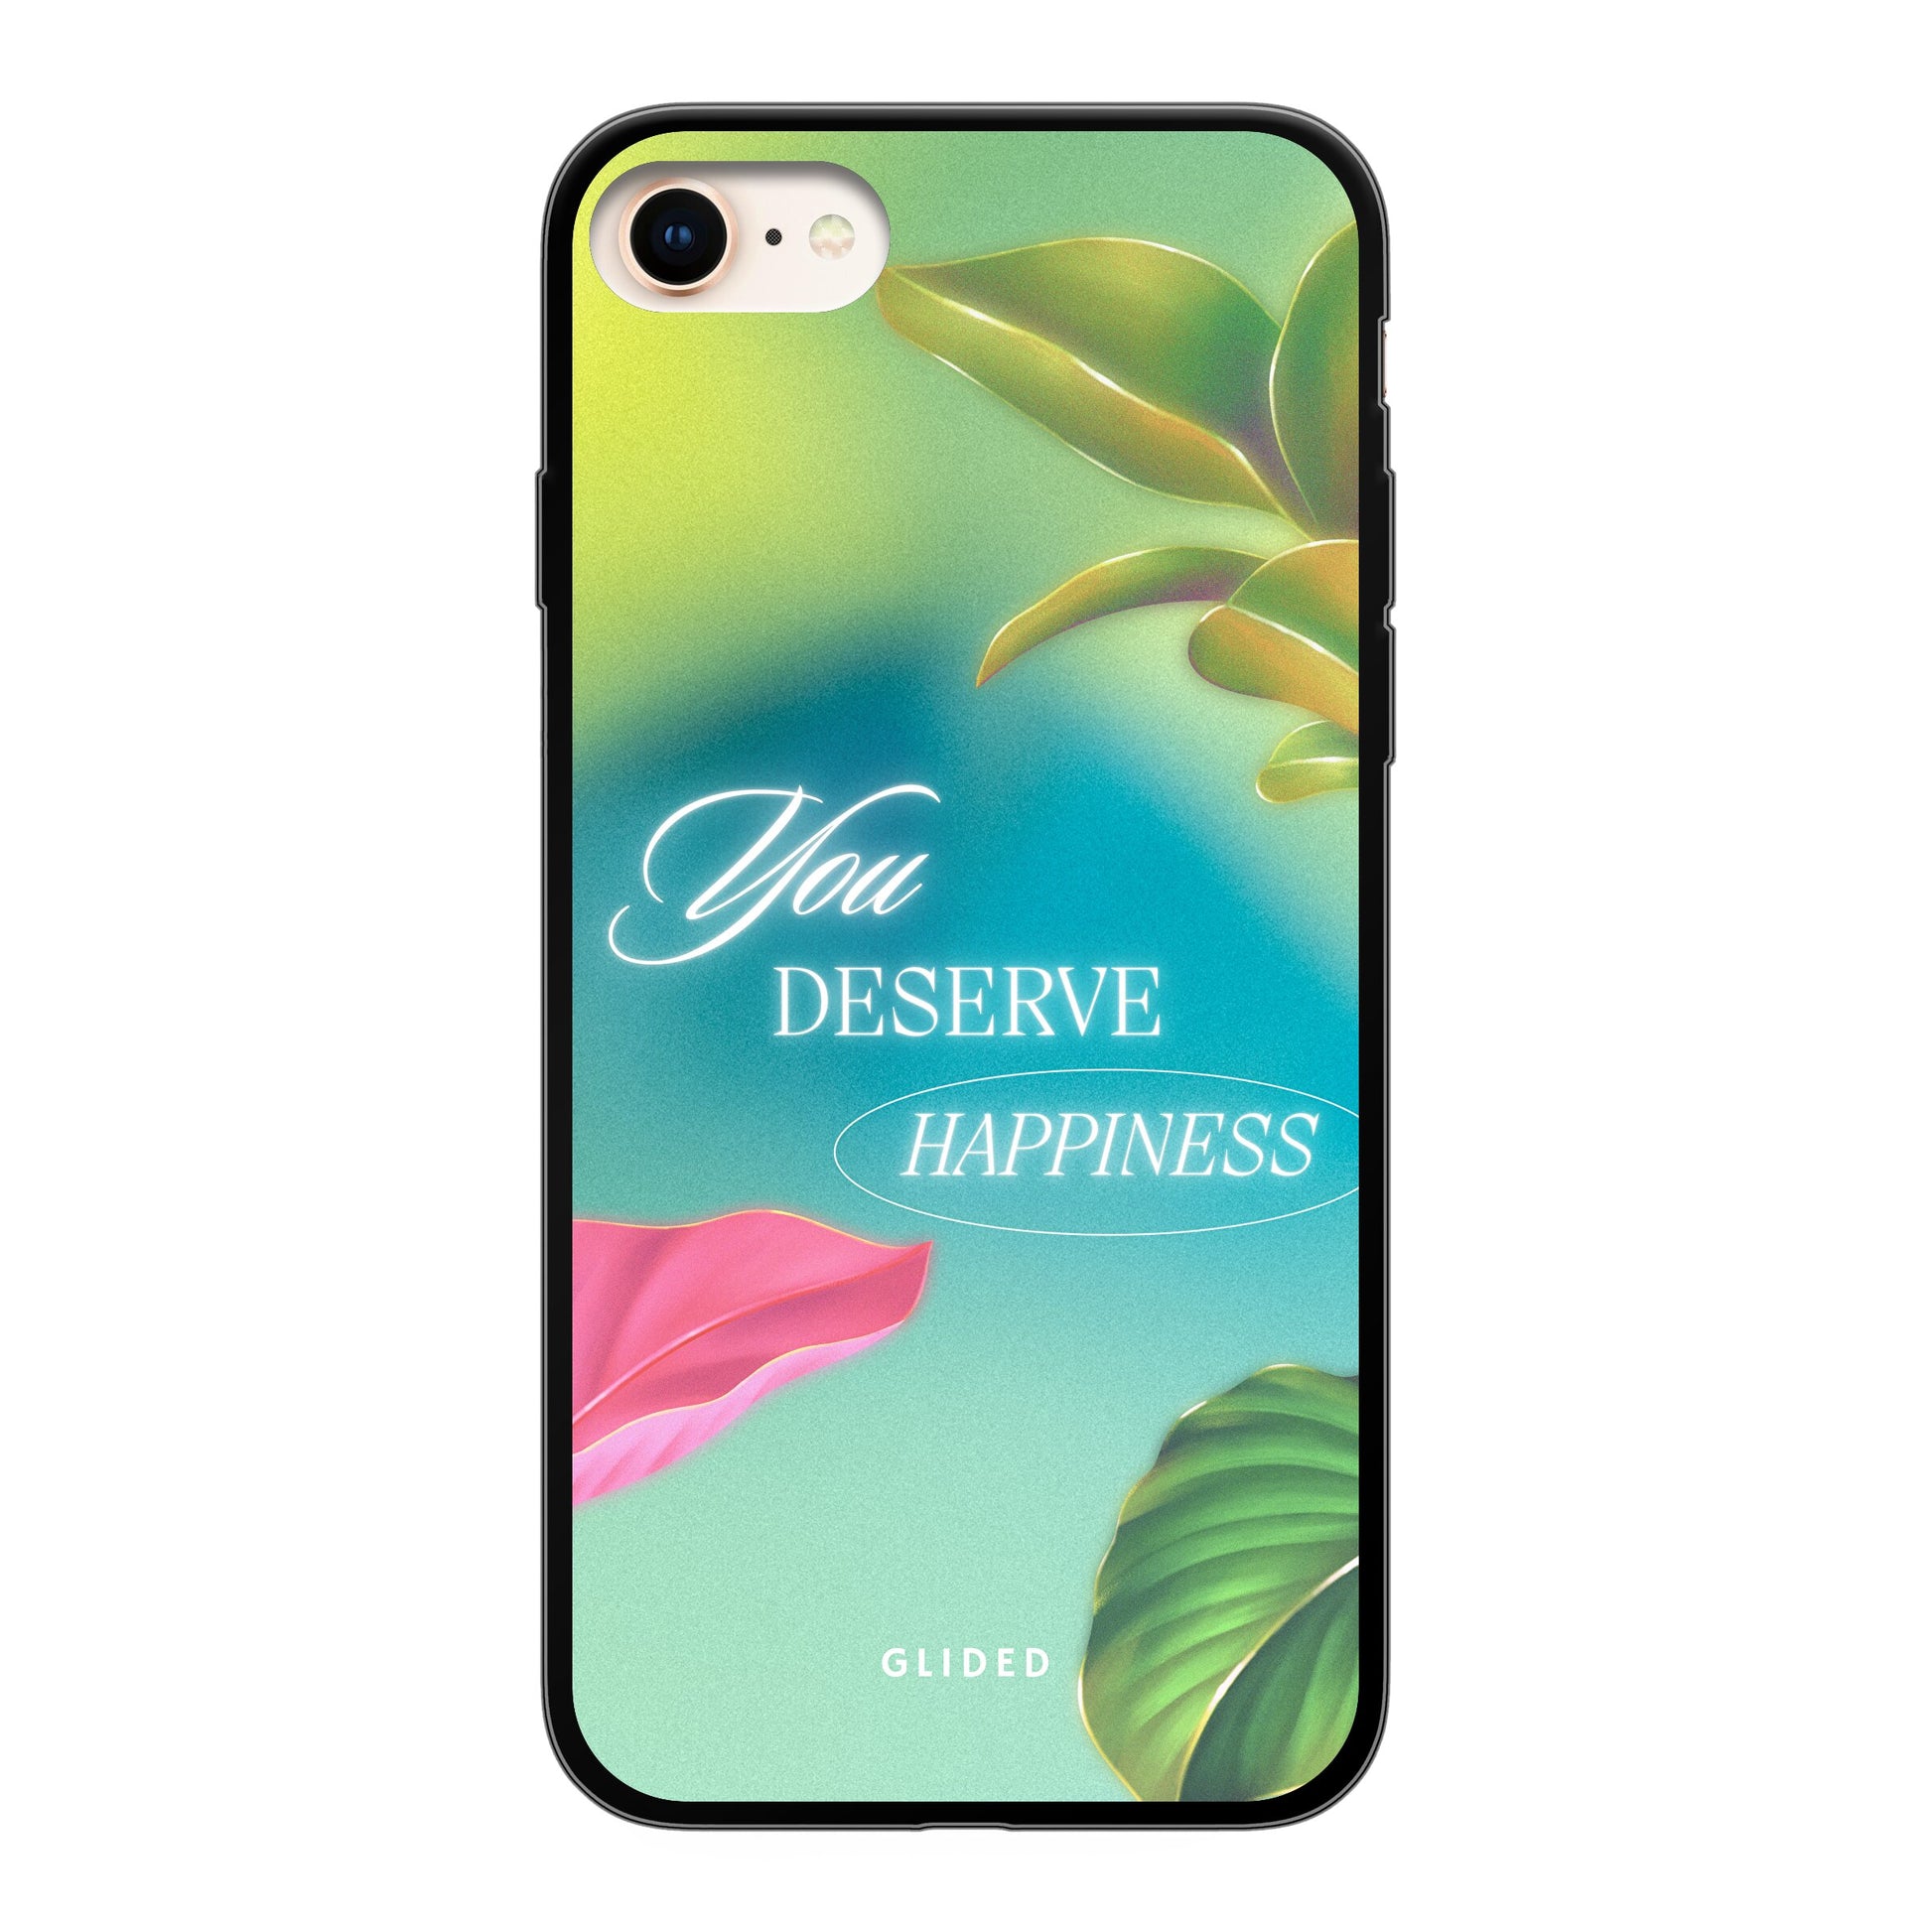 Happiness - iPhone 8 - Soft case